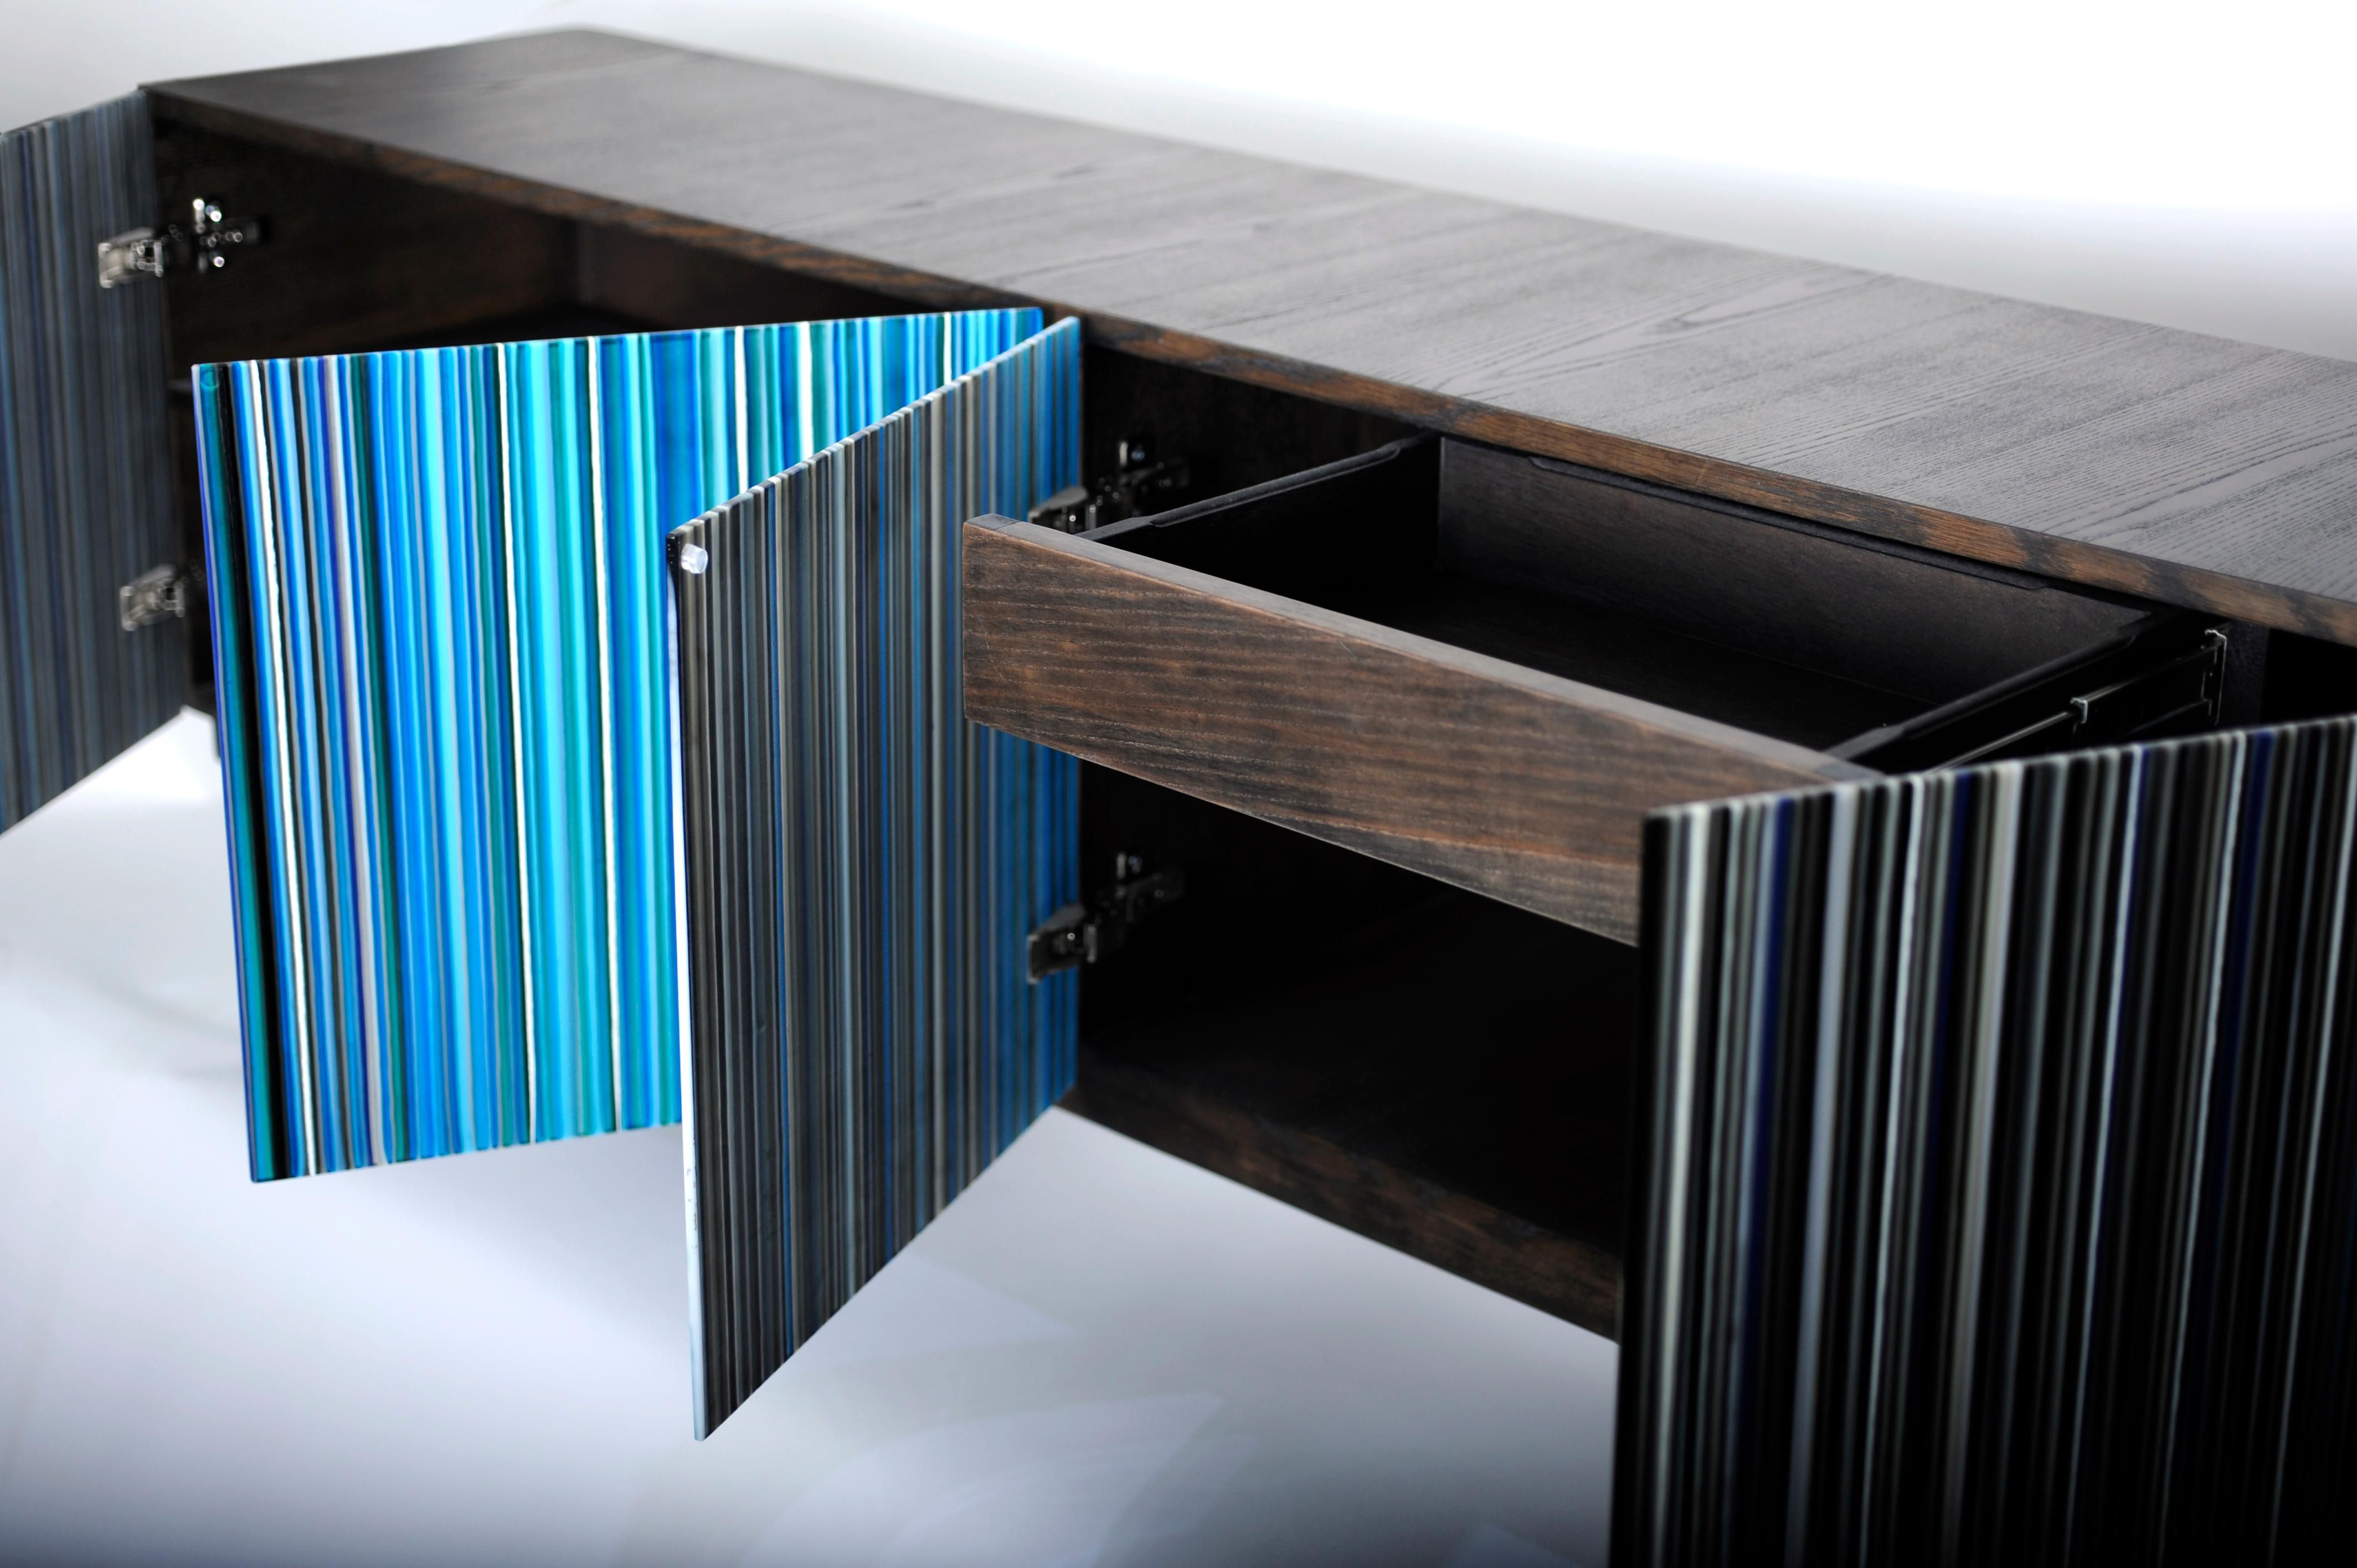 Retro Style Buffet Credenza, Barcode Design In Colored Glass, Shades Of Blue Regarding Blue Stained Glass Credenzas (View 9 of 30)